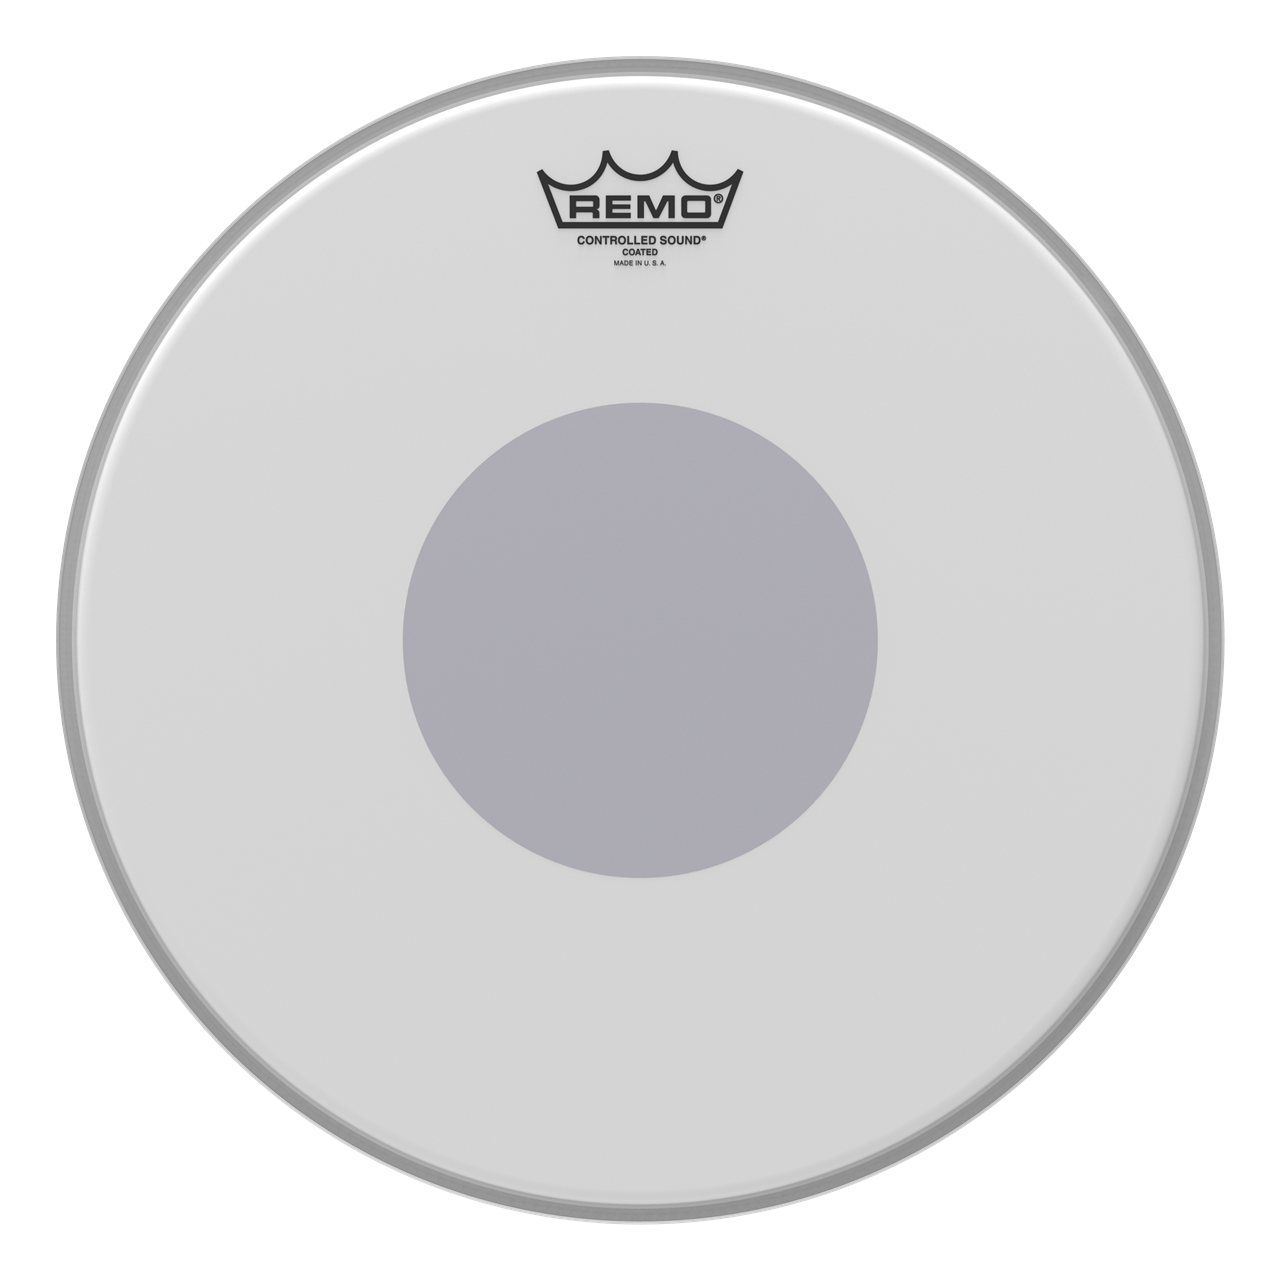 Remo CS-0112-10 Controlled Sound, 12" Coated, Black Dot